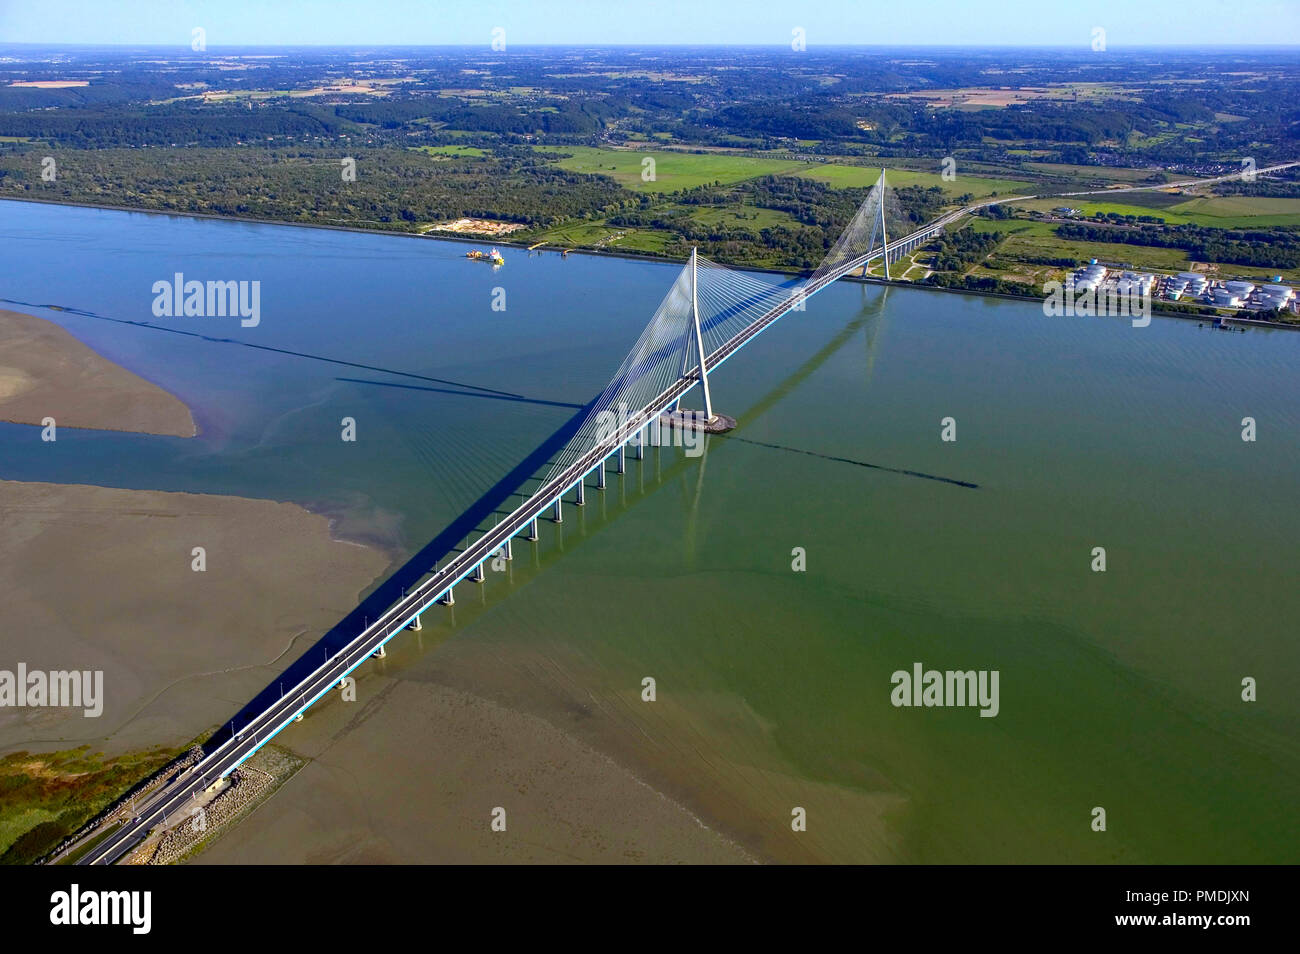 The Normandy Bridge ('pont de Normandie'), cable-stayed road bridge across the estuary of the River Seine linking Le Havre to Honfleur in Normandy. Stock Photo